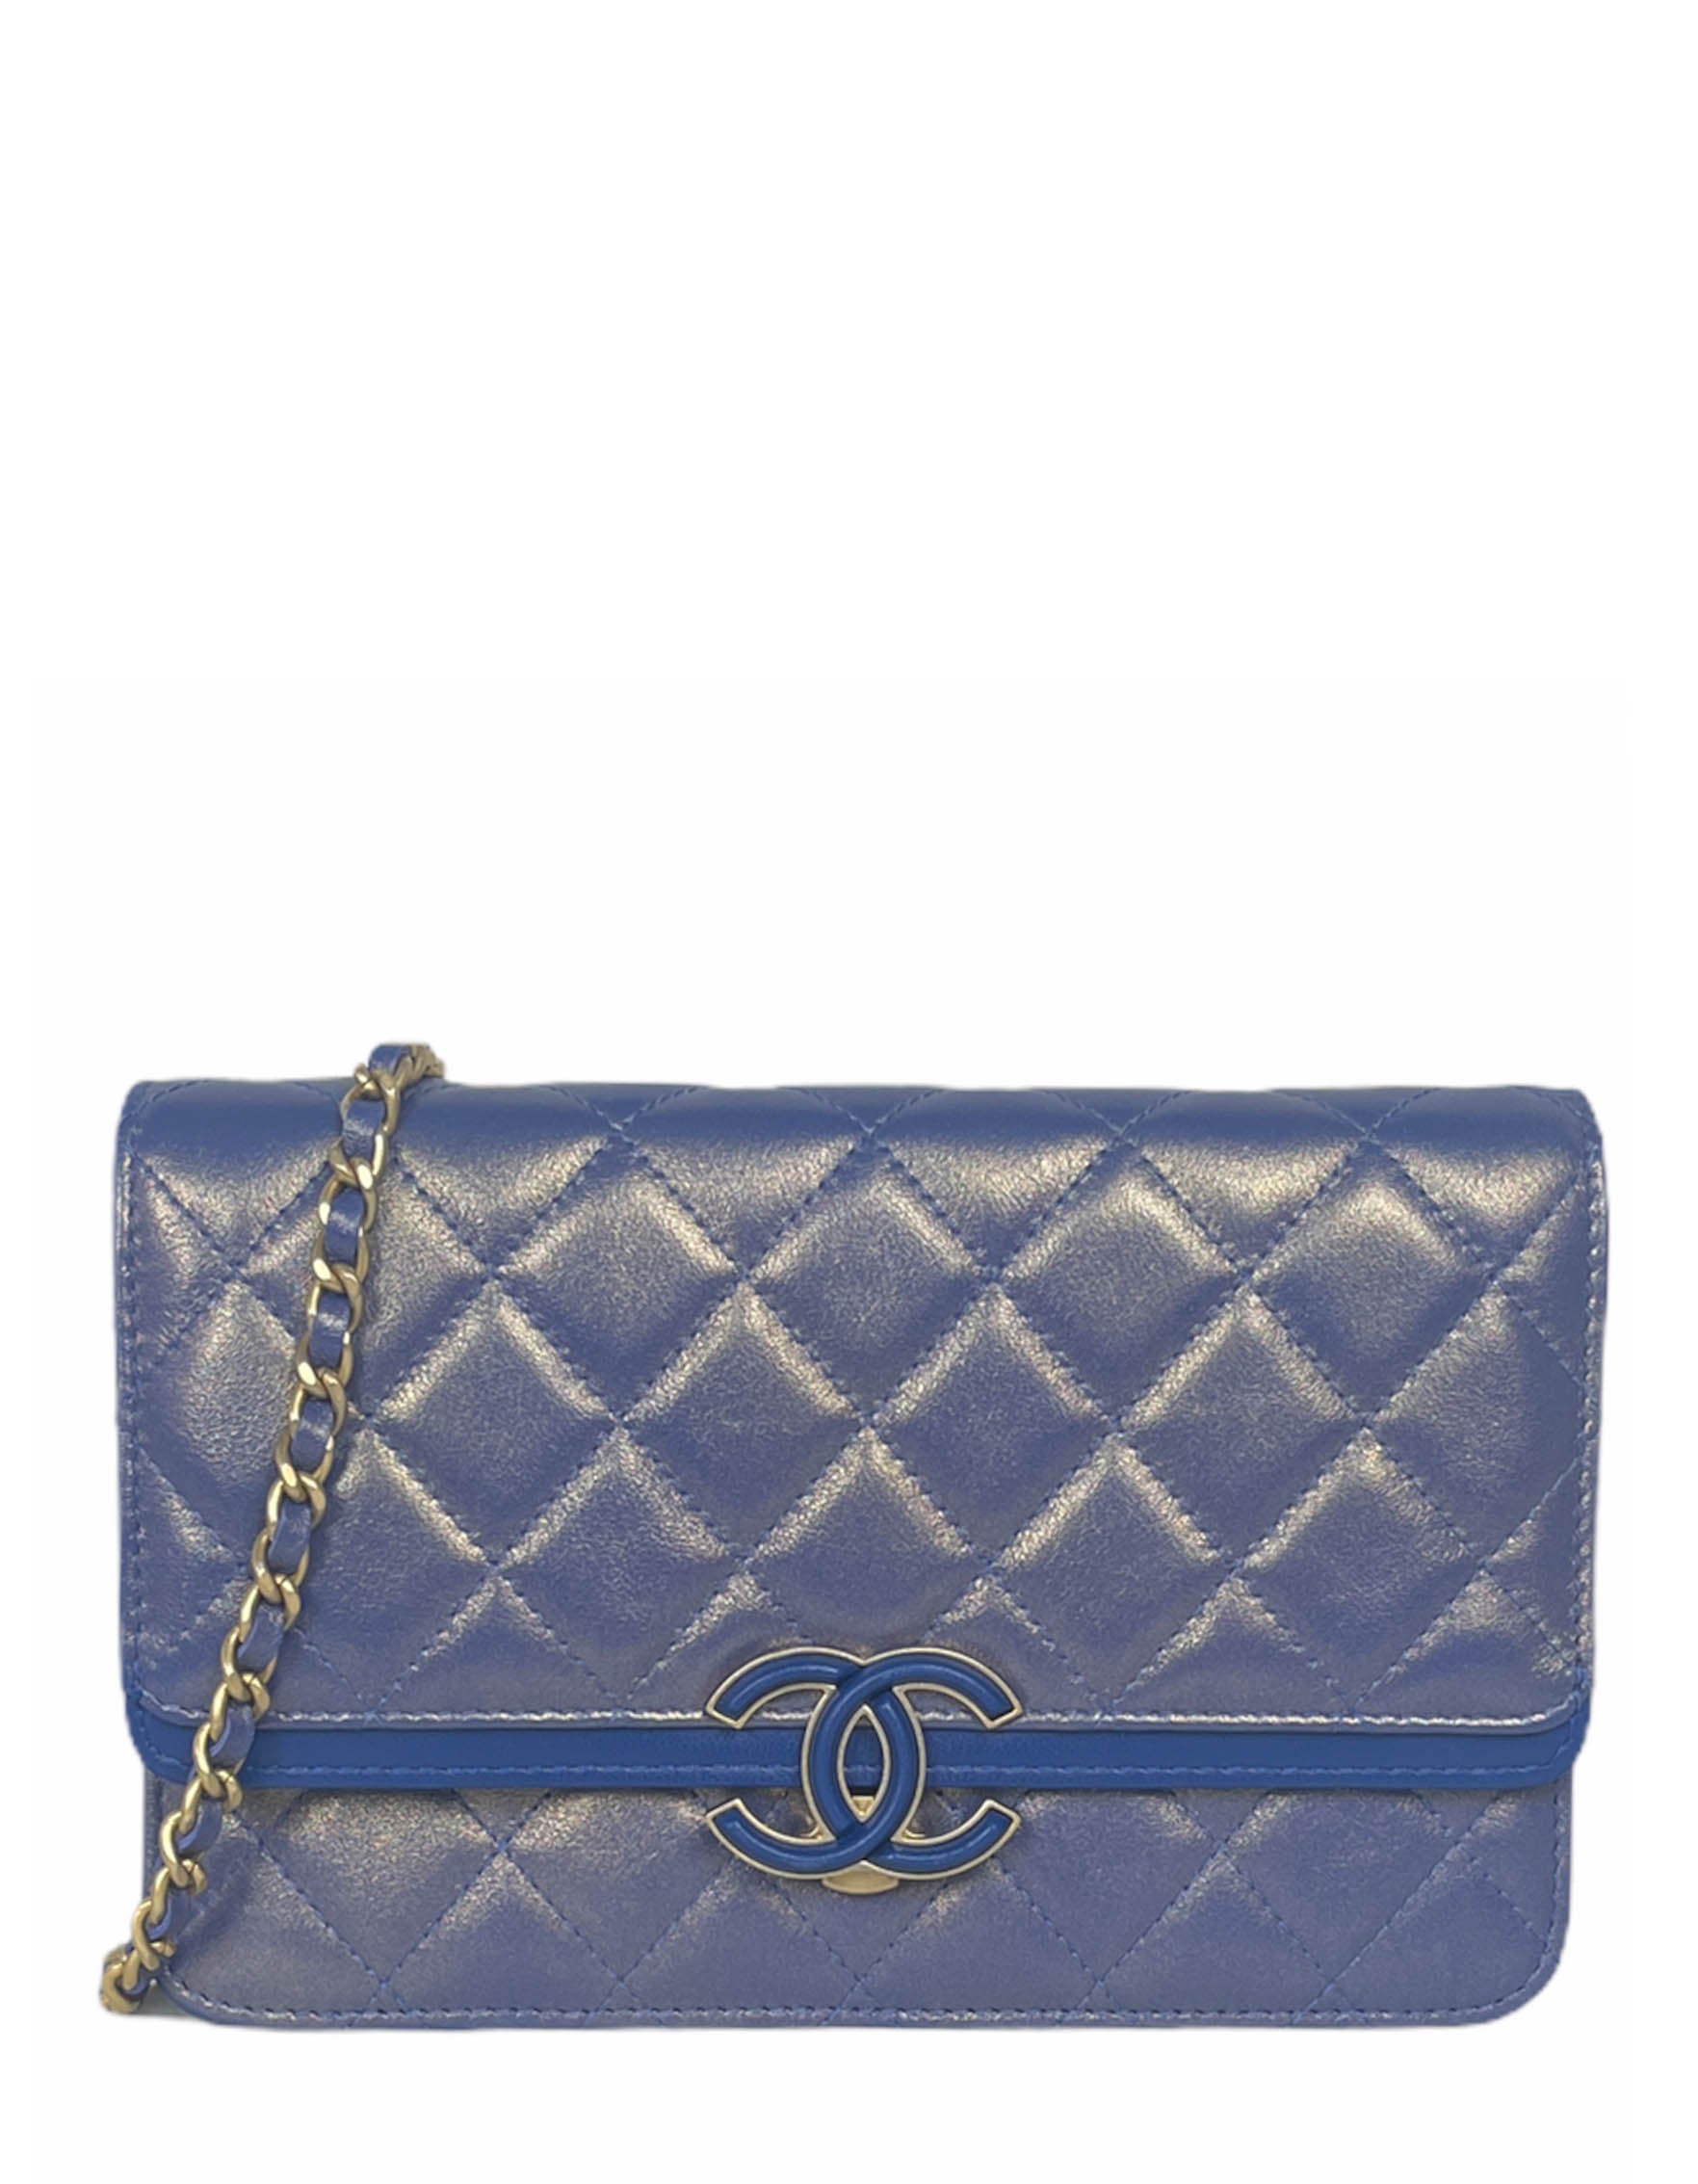 CHANEL Iridescent Caviar Quilted Wallet on Chain WOC Dark Blue 1280639